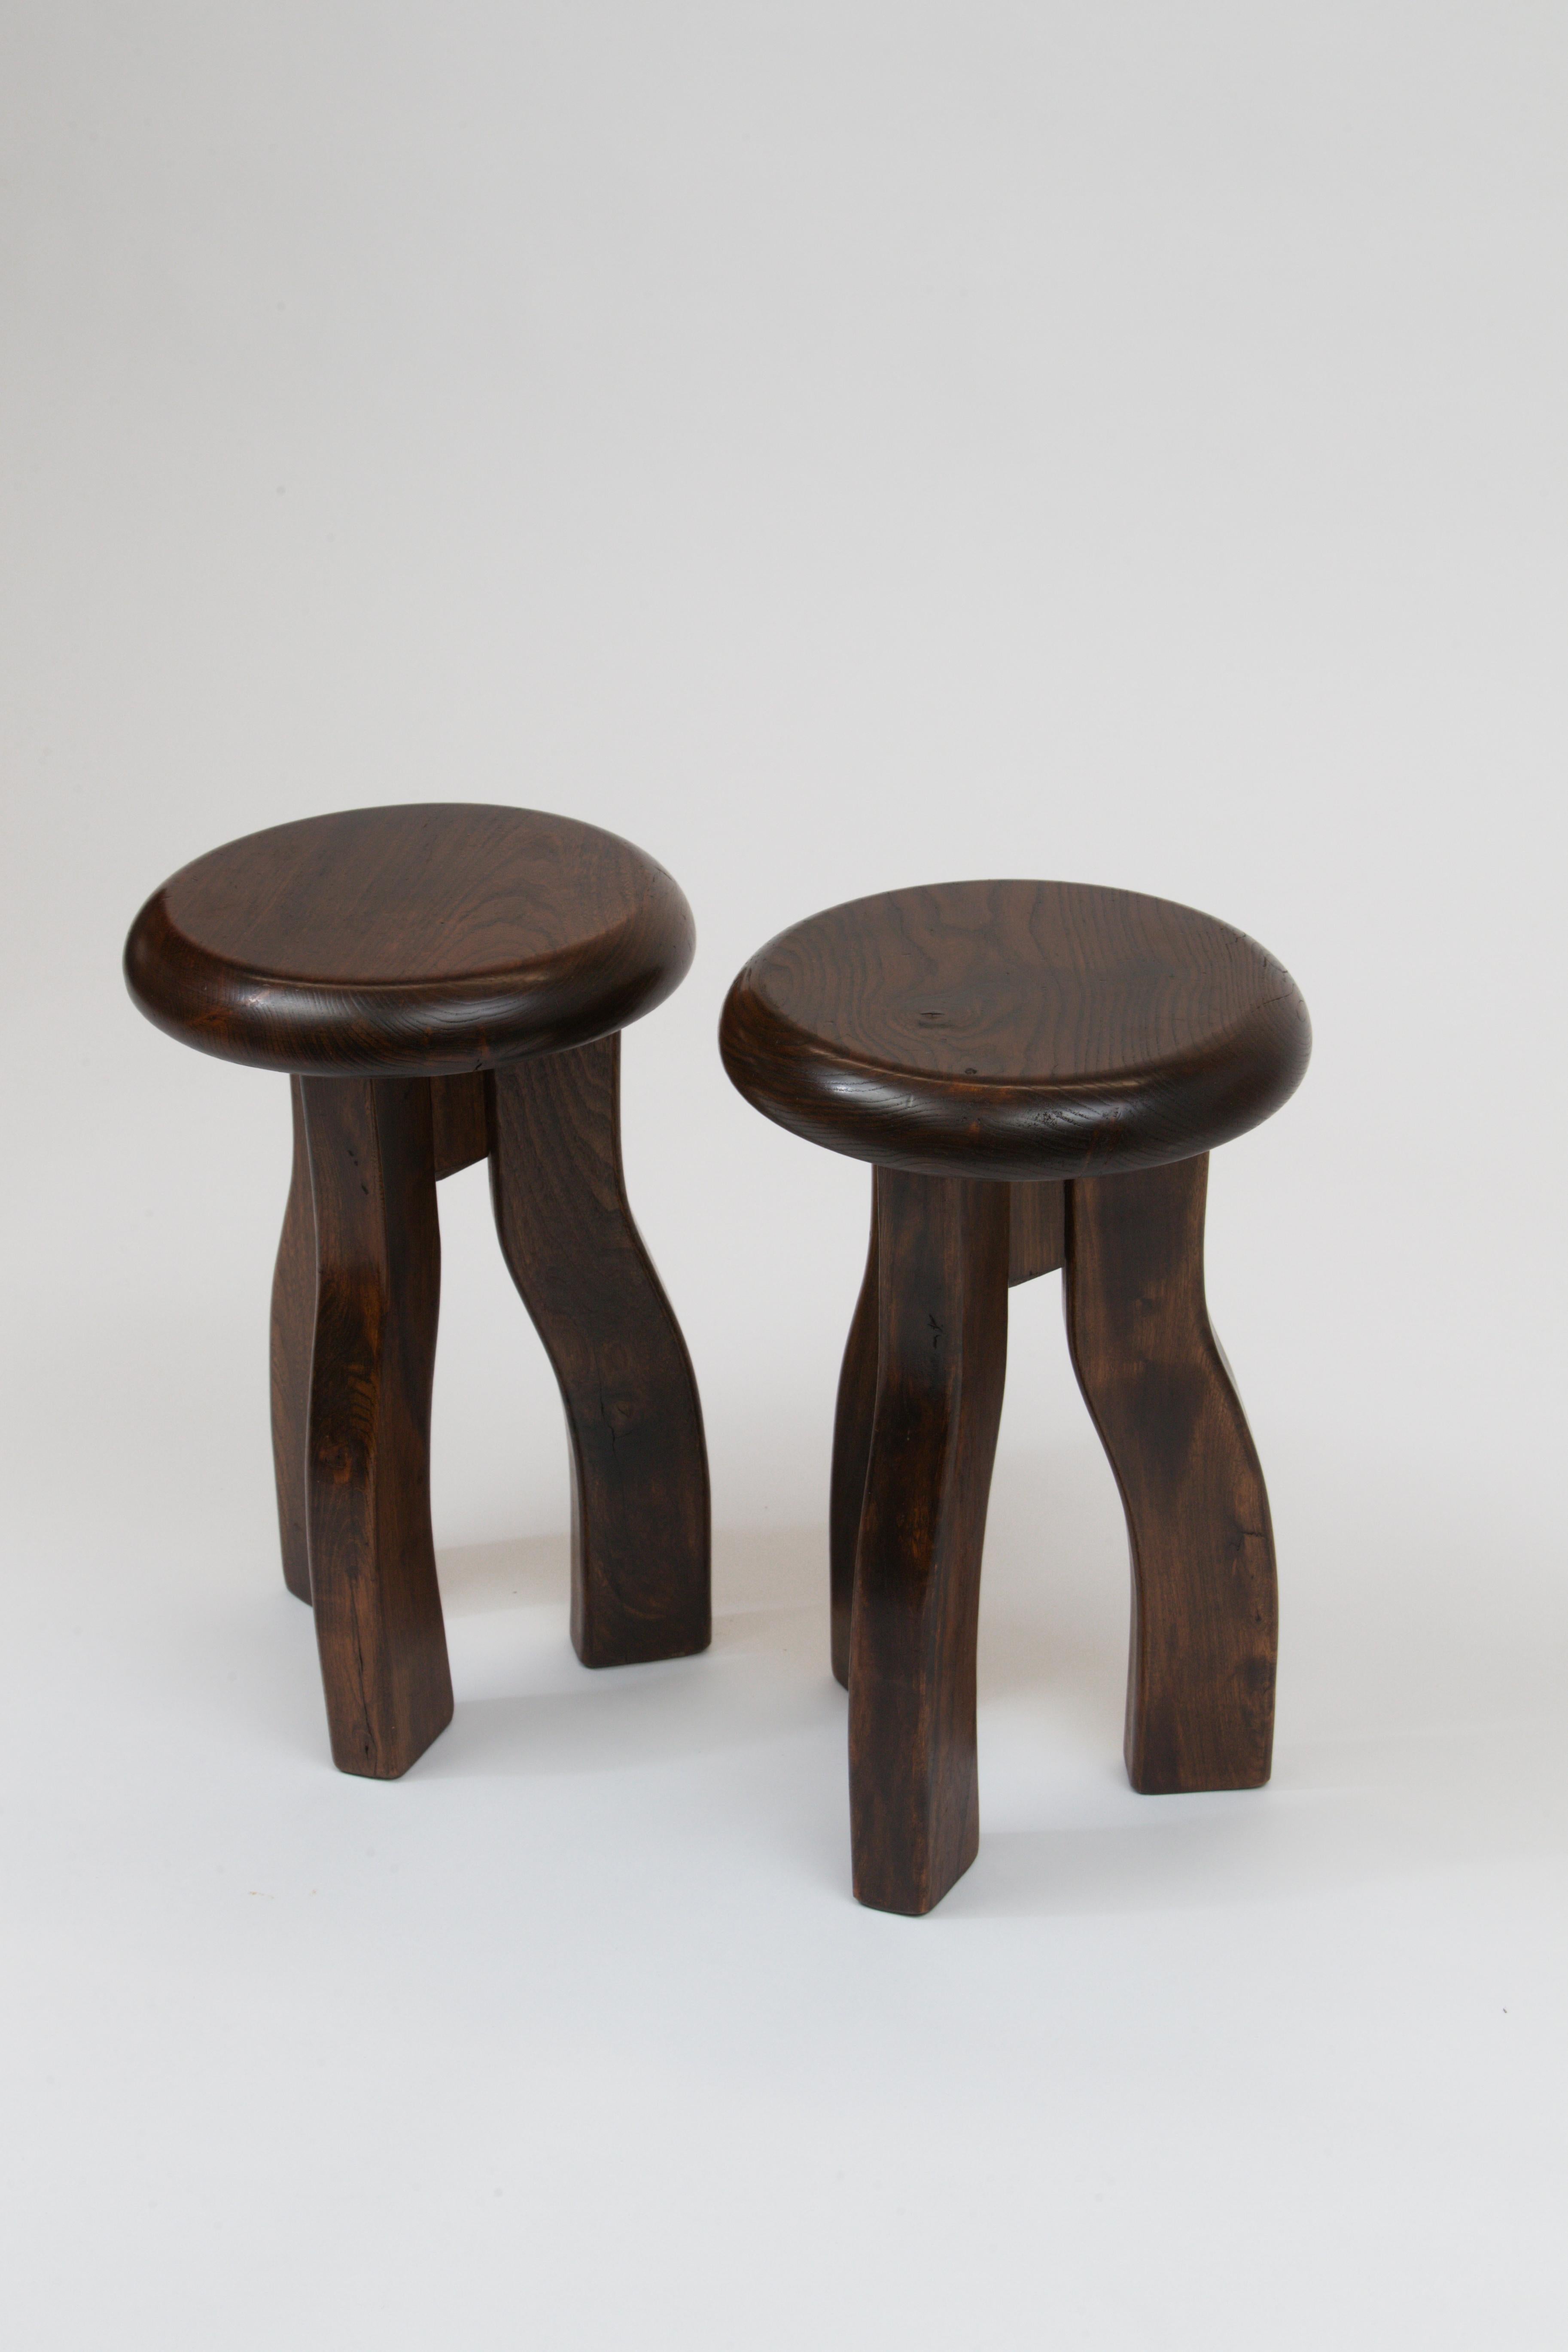 An unusual pair of three-legged stools with a solid top and thick curving legs, made of Elmwood and stained a rich brown.

Also nicely used as movable side tables.